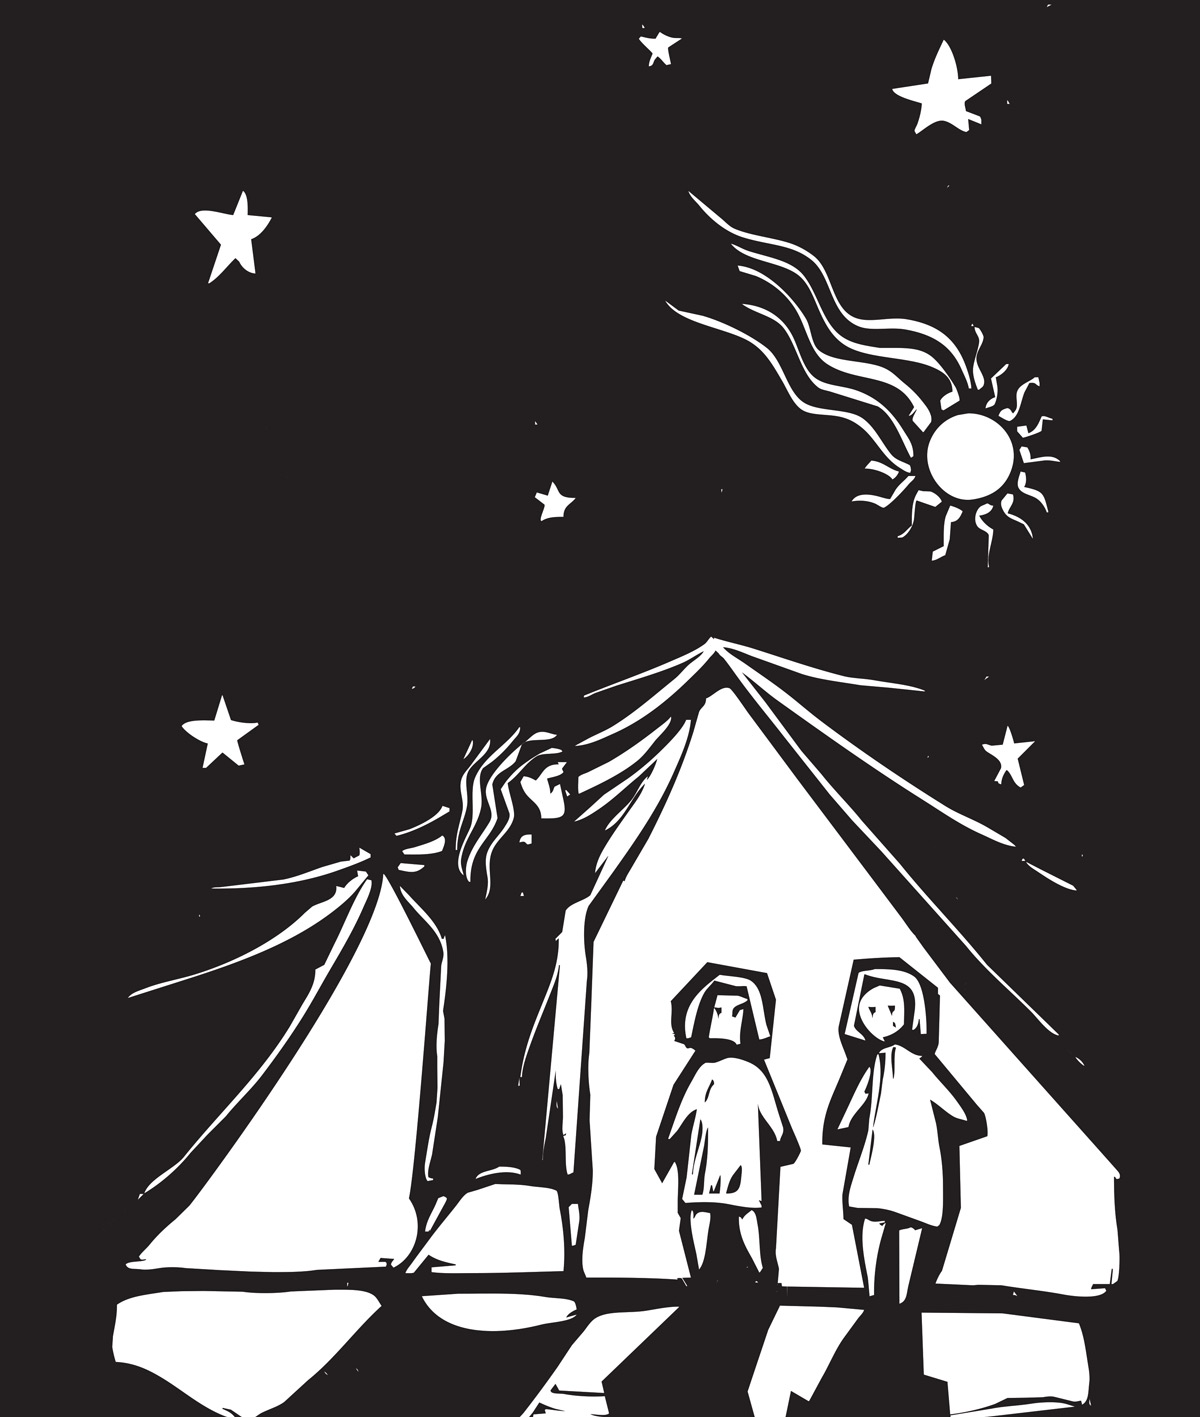 Family putting up tent under the stars illustration